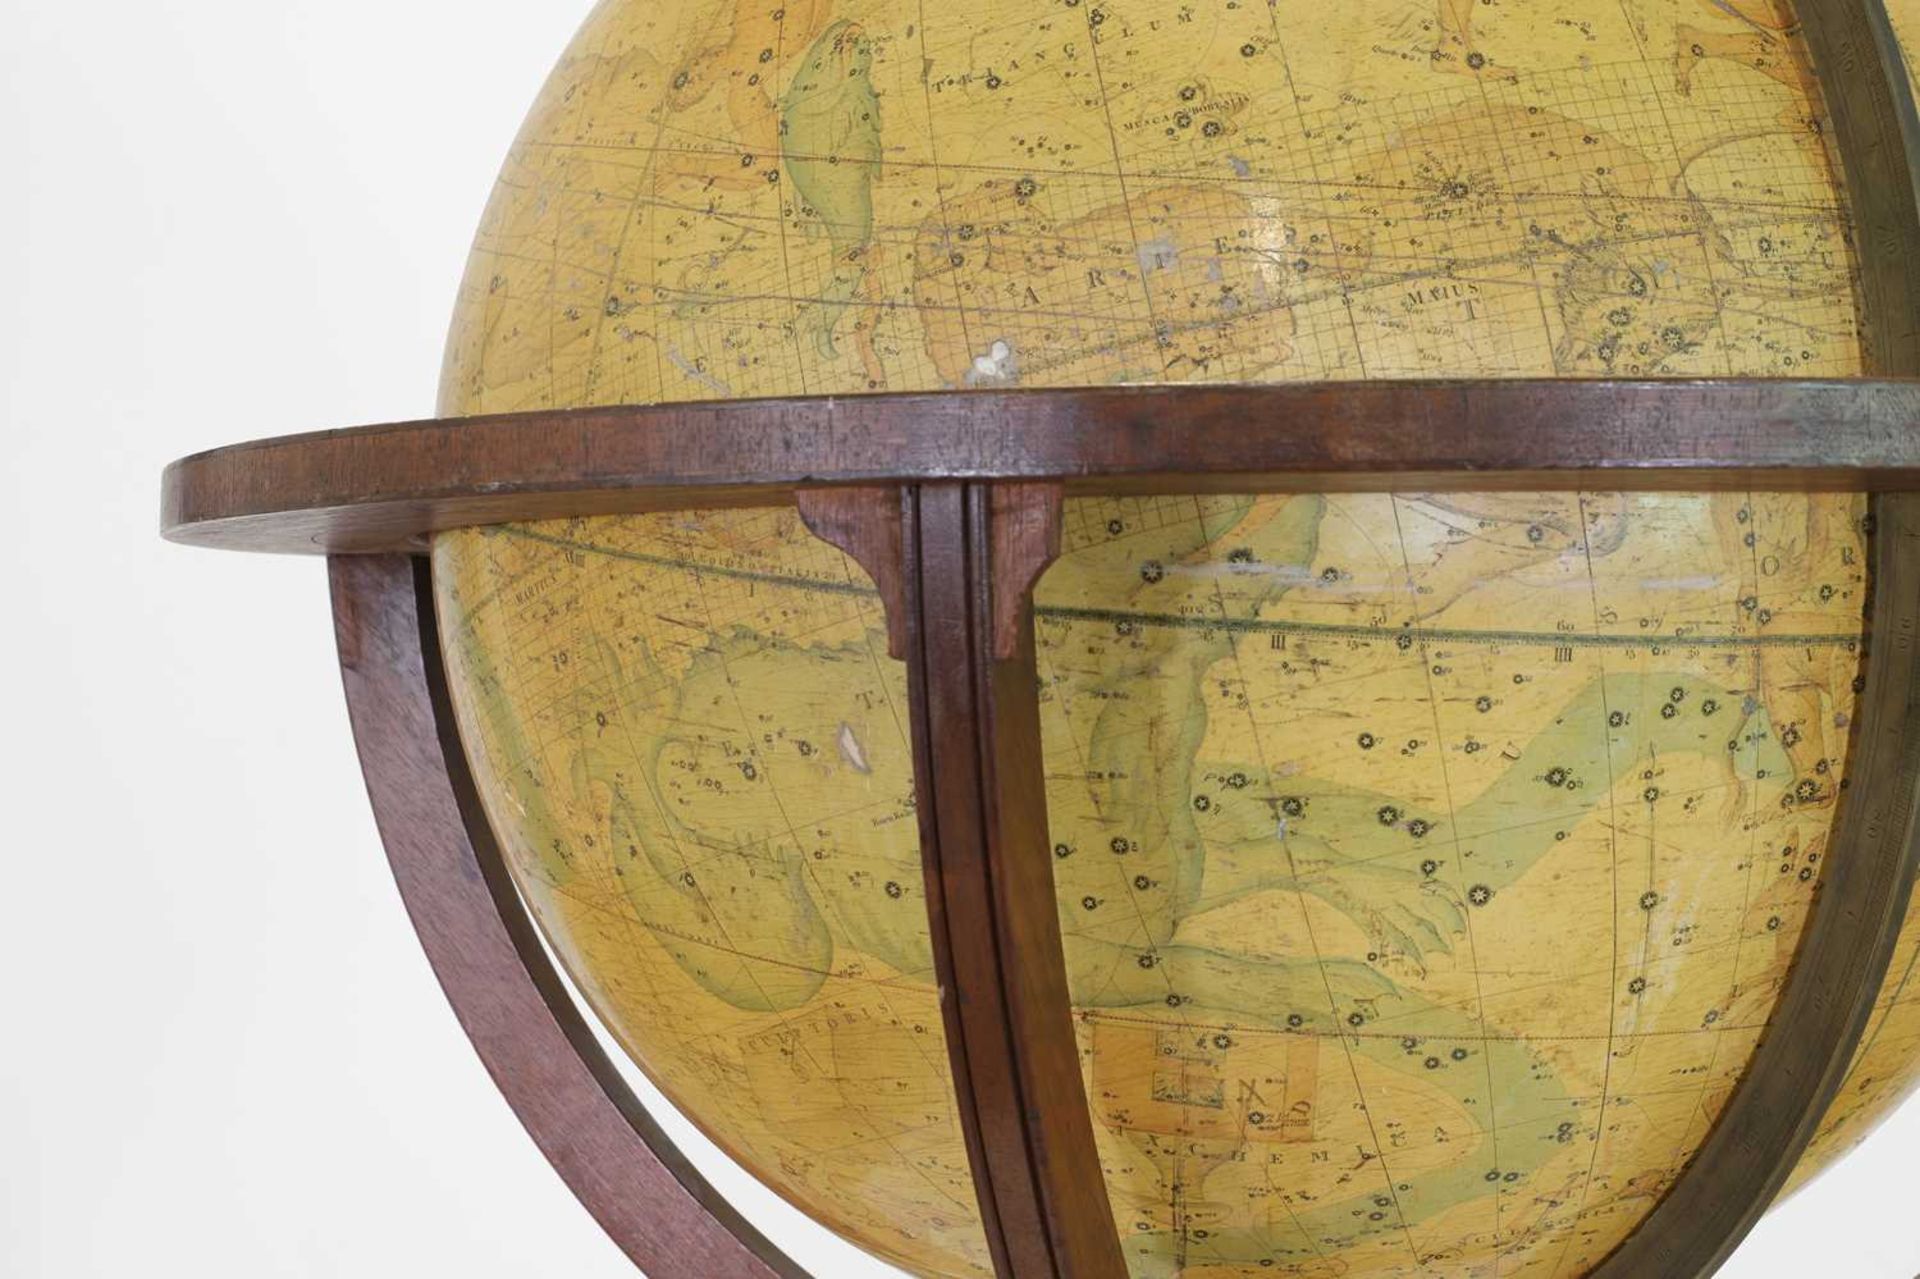 A large celestial library globe by J & W Cary, - Image 44 of 84